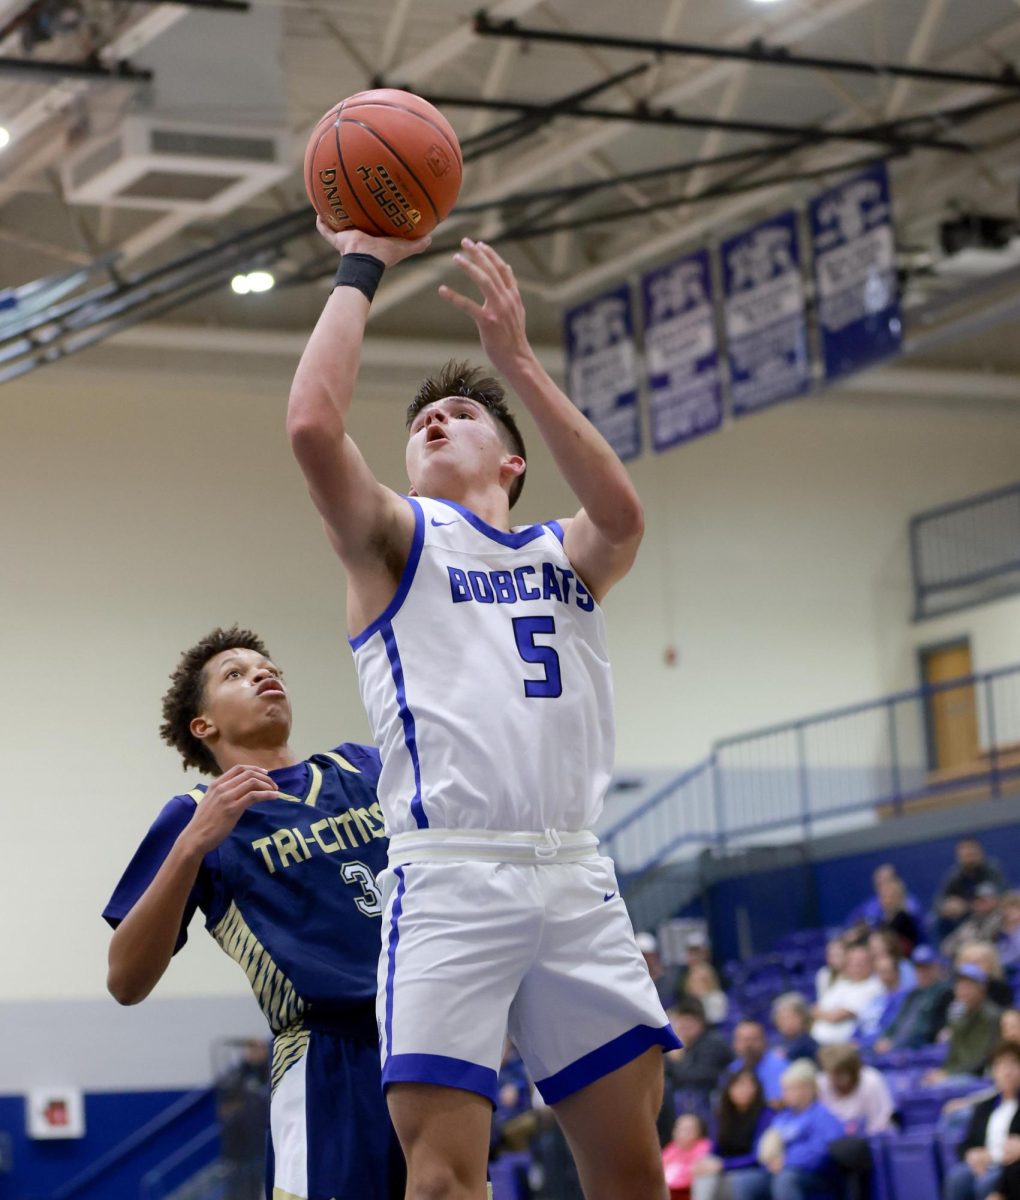 Sophomore guard Blake Burnett scored 16 points on Thursday in the Bobcats 88-62 win over Owsley County in the semifinals of the Short-Redmond Holiday Classic.